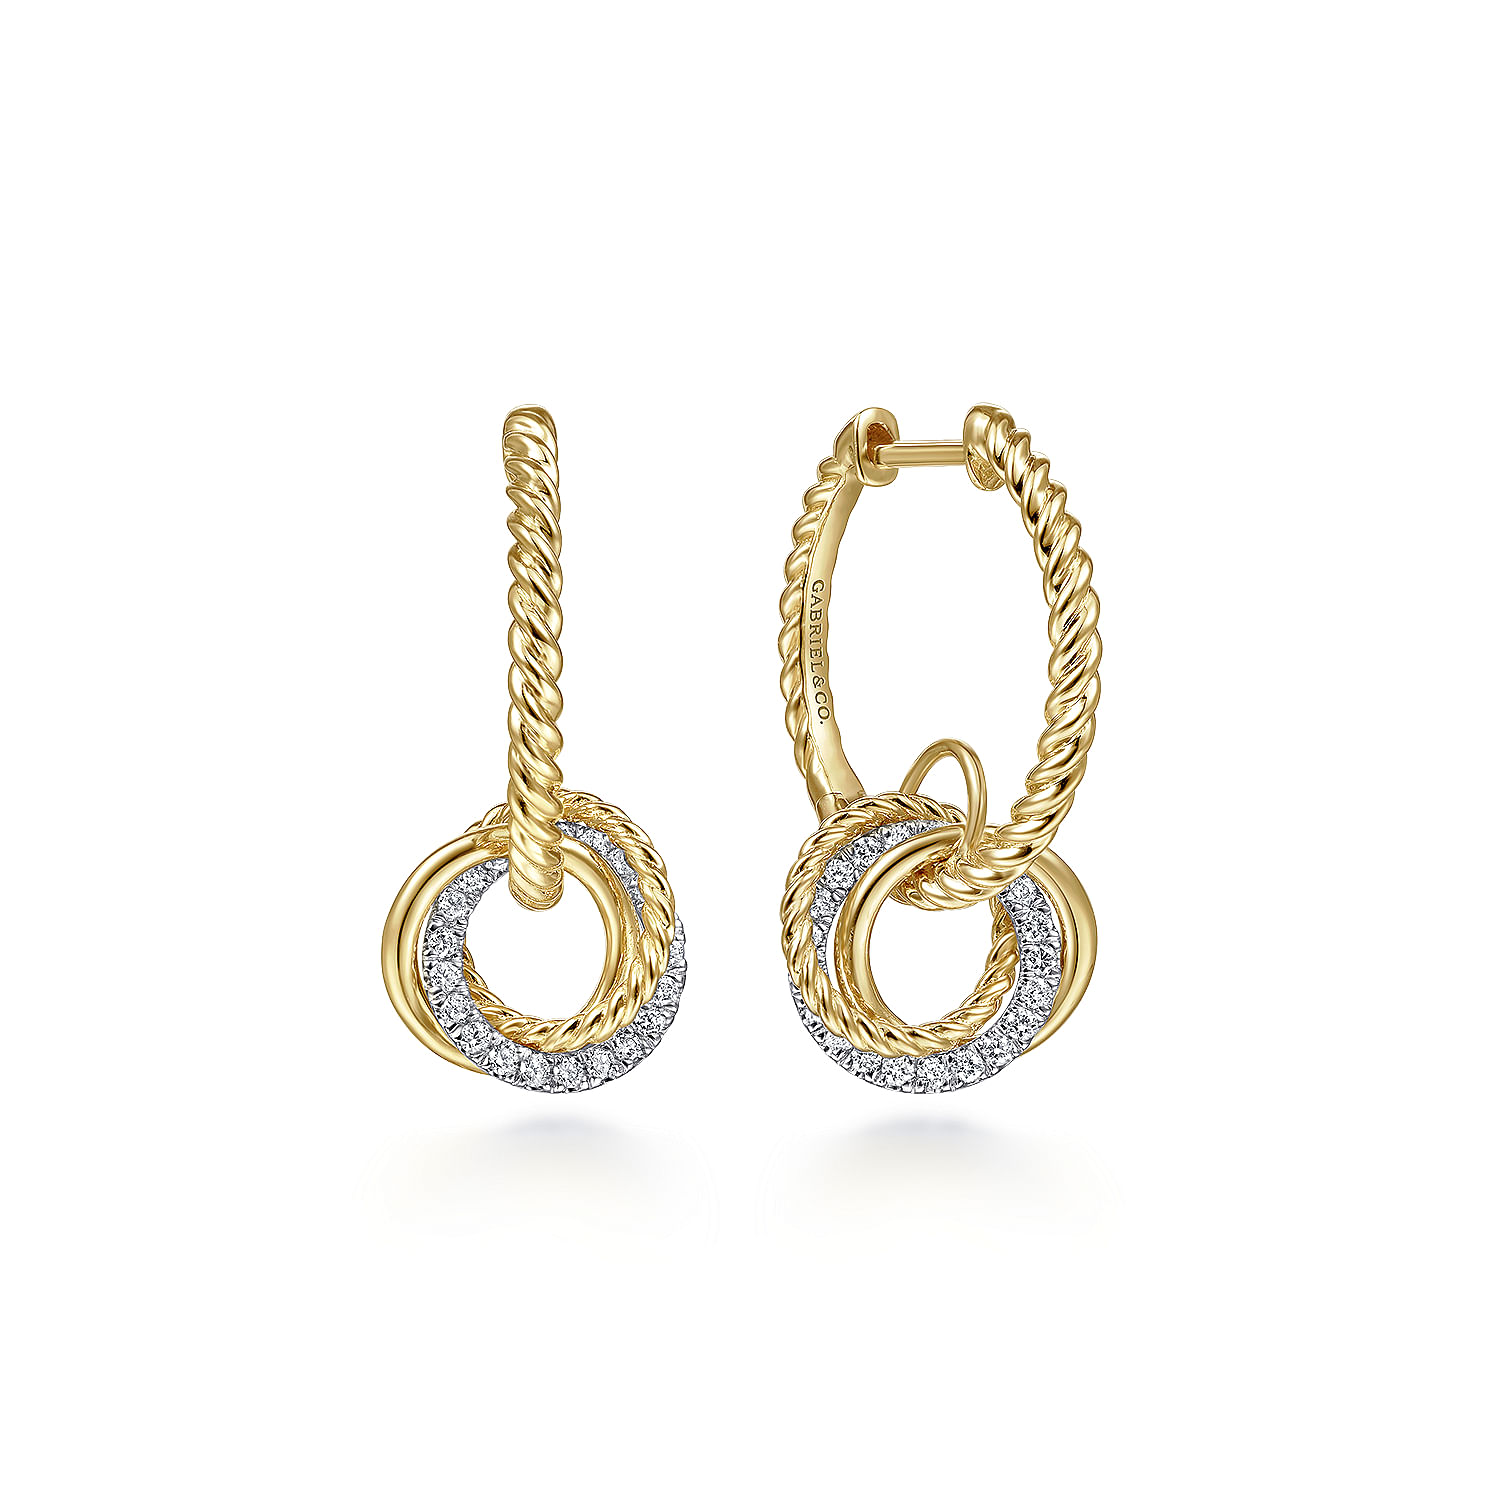 Gabriel - 14K Yellow-White Gold Rope Huggie Earrings with Diamond and Plain Gold Knot Design.